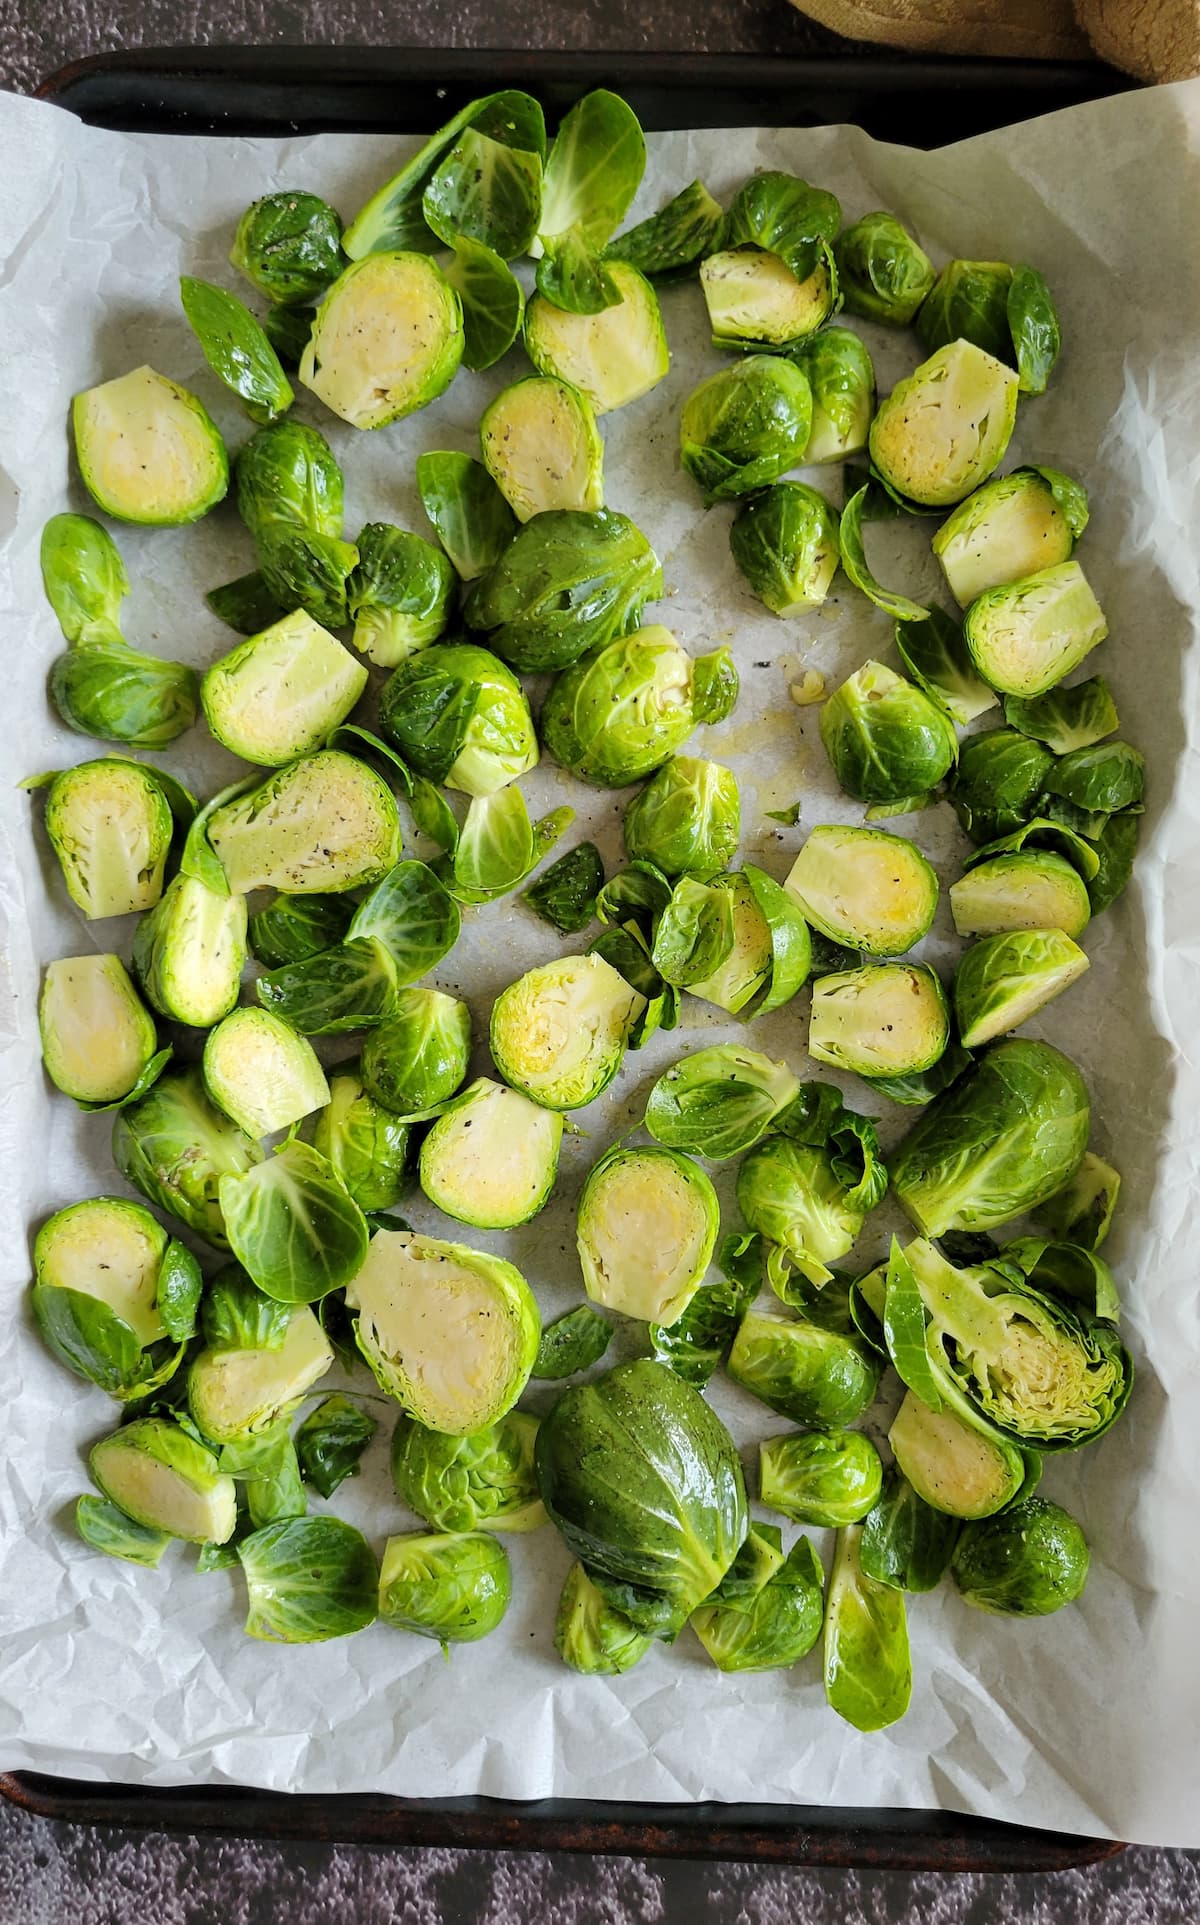 halved and trimmed raw brussels sprouts on a parchment lined baking sheet